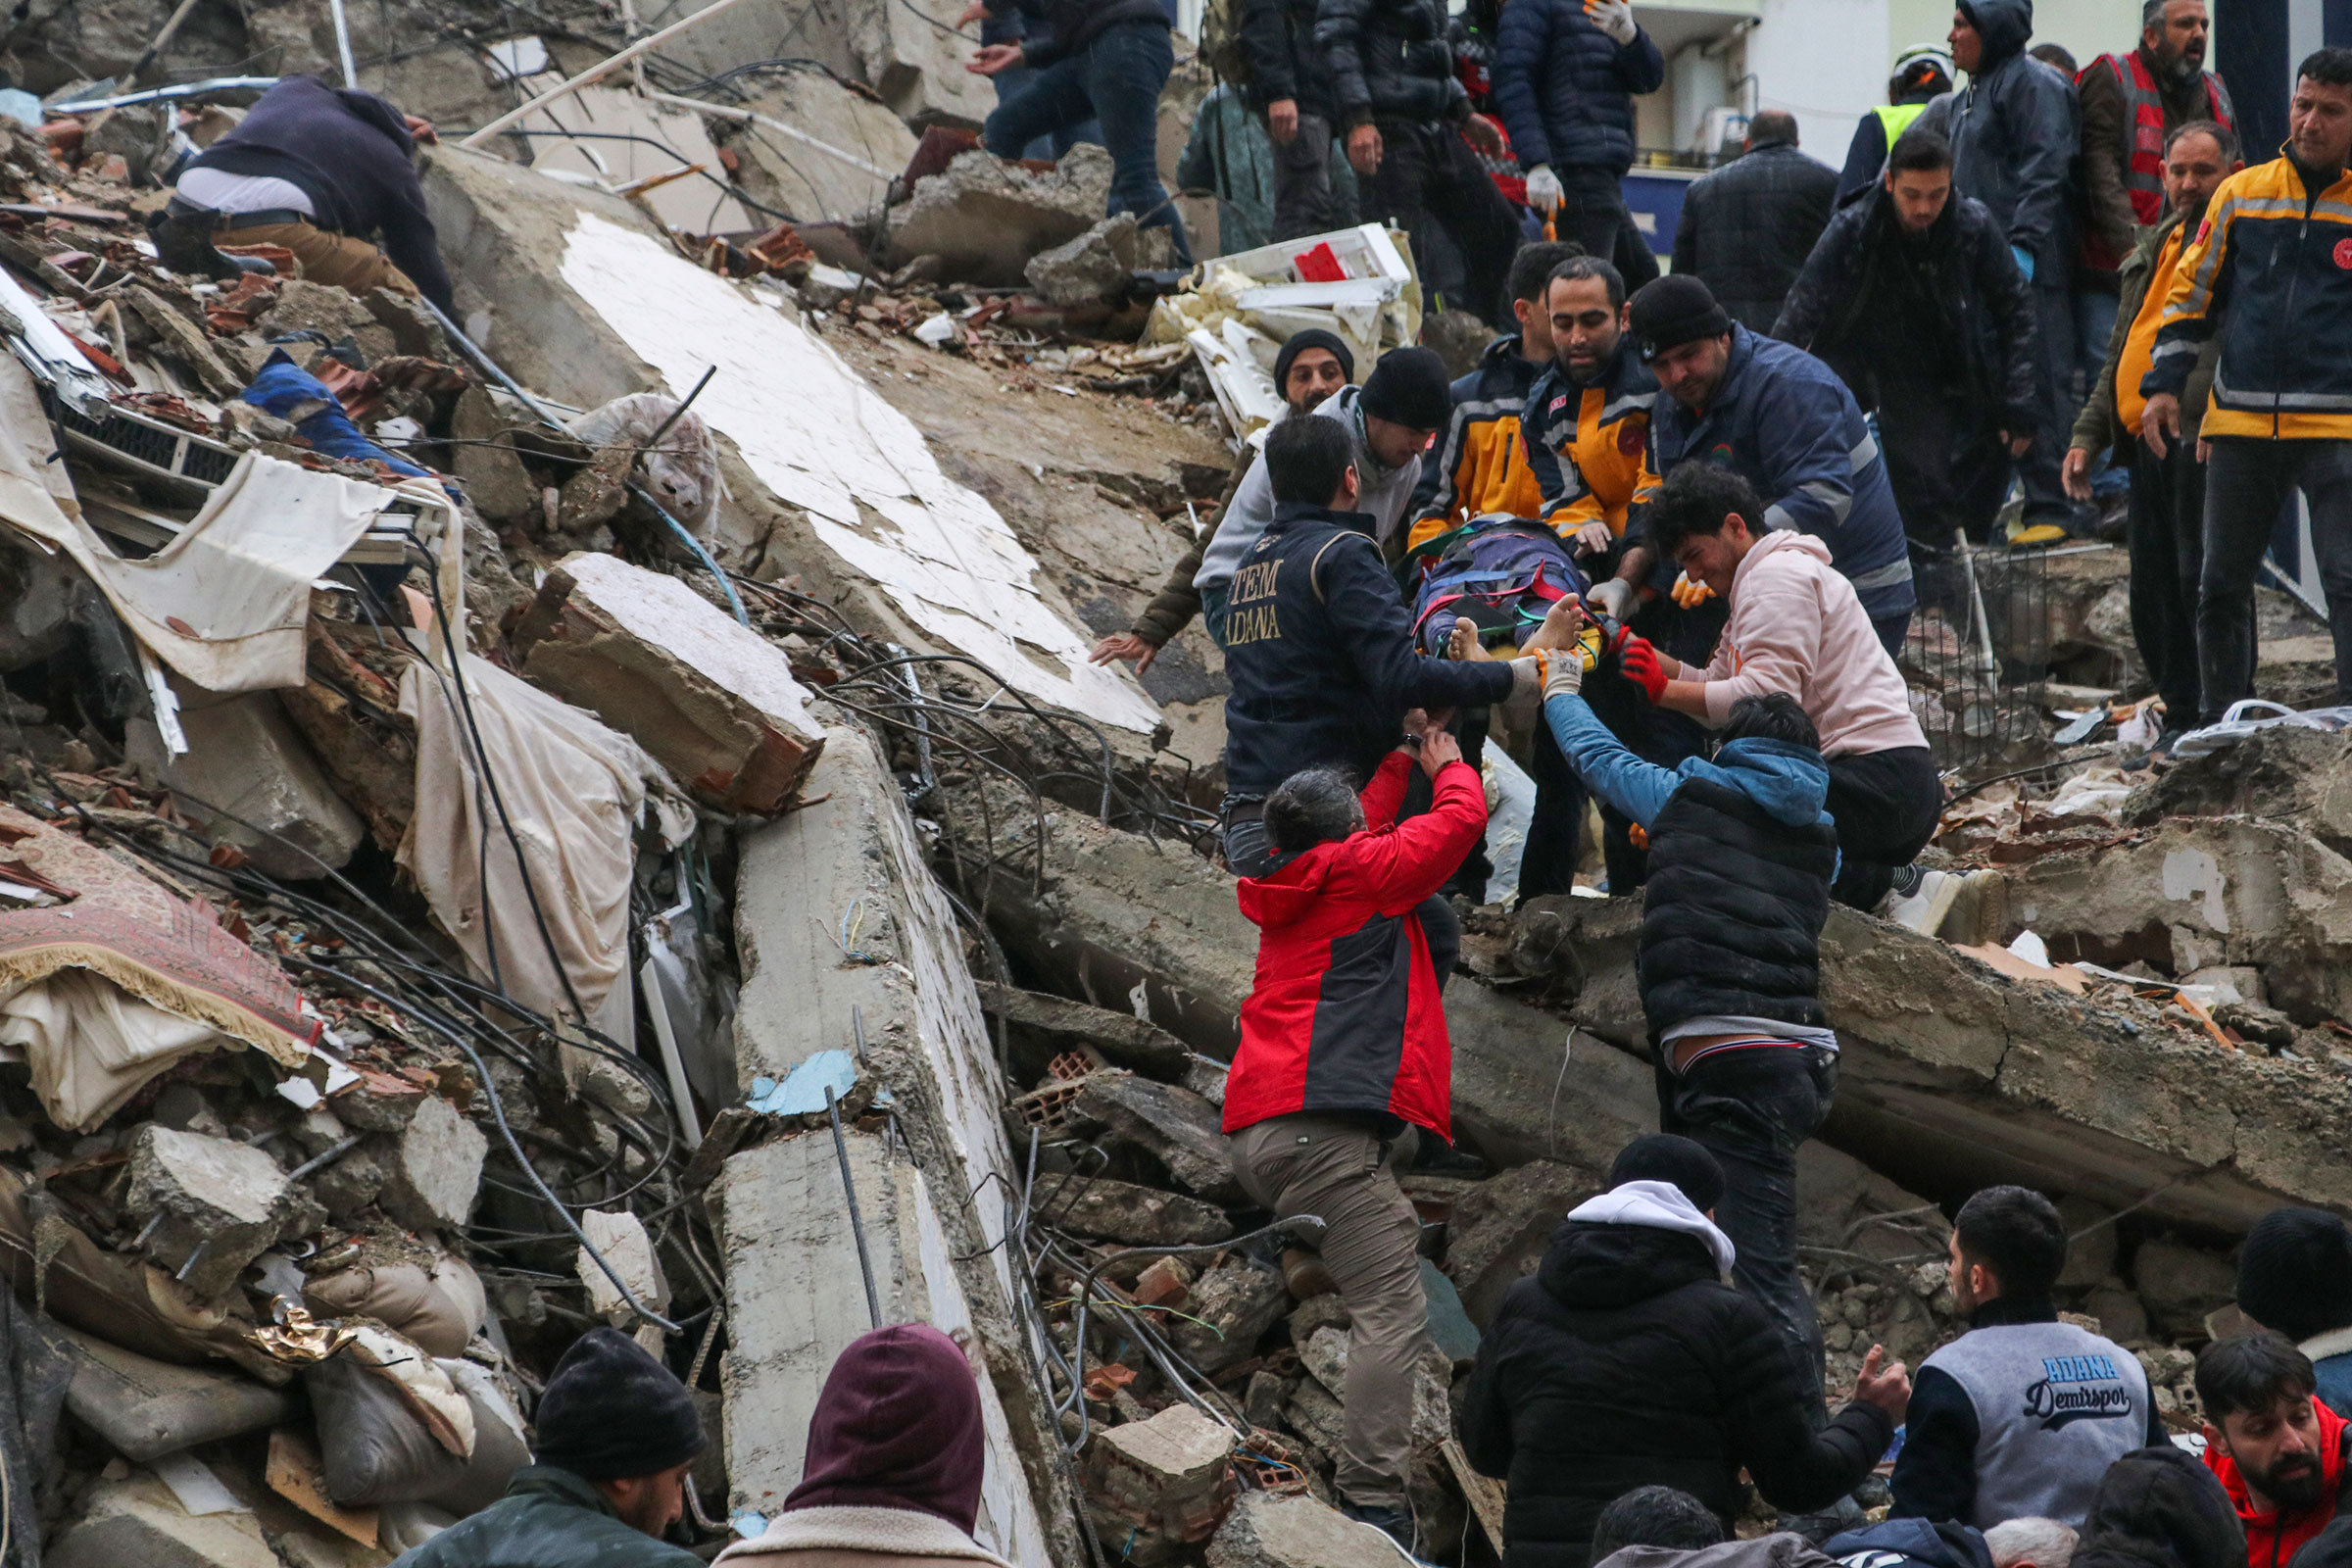 People and emergency teams rescue a person on a stretcher from a collapsed building in Adana, Turkey, on Feb. 6, 2023. A powerful quake has knocked down multiple buildings in southeast Turkey and Syria and many casualties are feared. (IHA agency/AP)